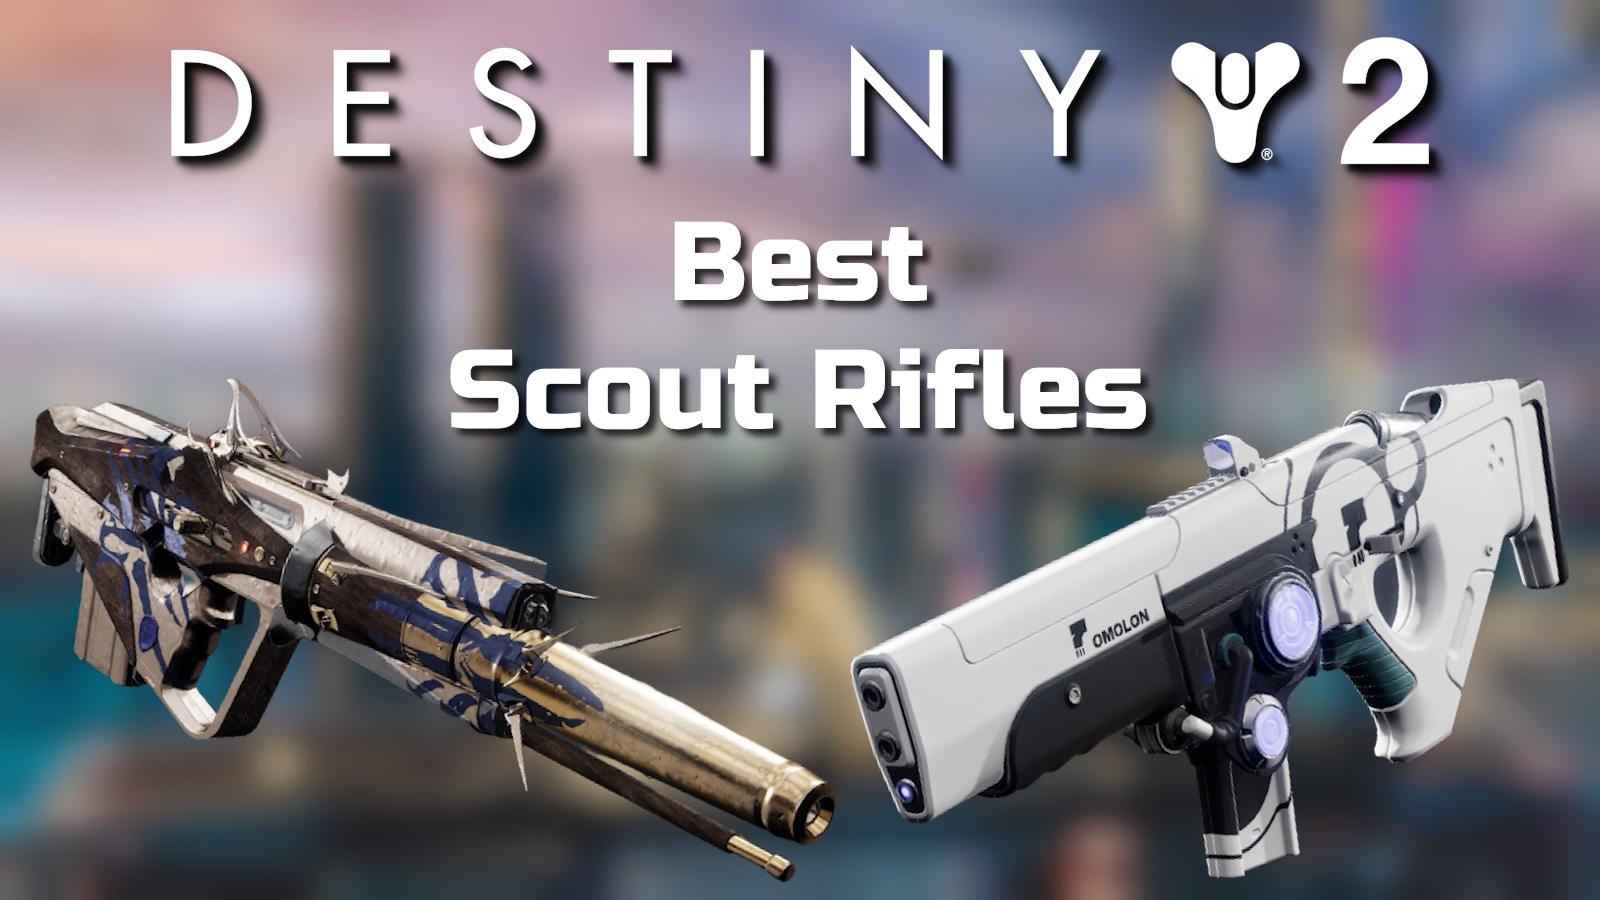 The best Scout Rifles to use in Destiny 2, with Hung Jury and Tarnished Mettle.